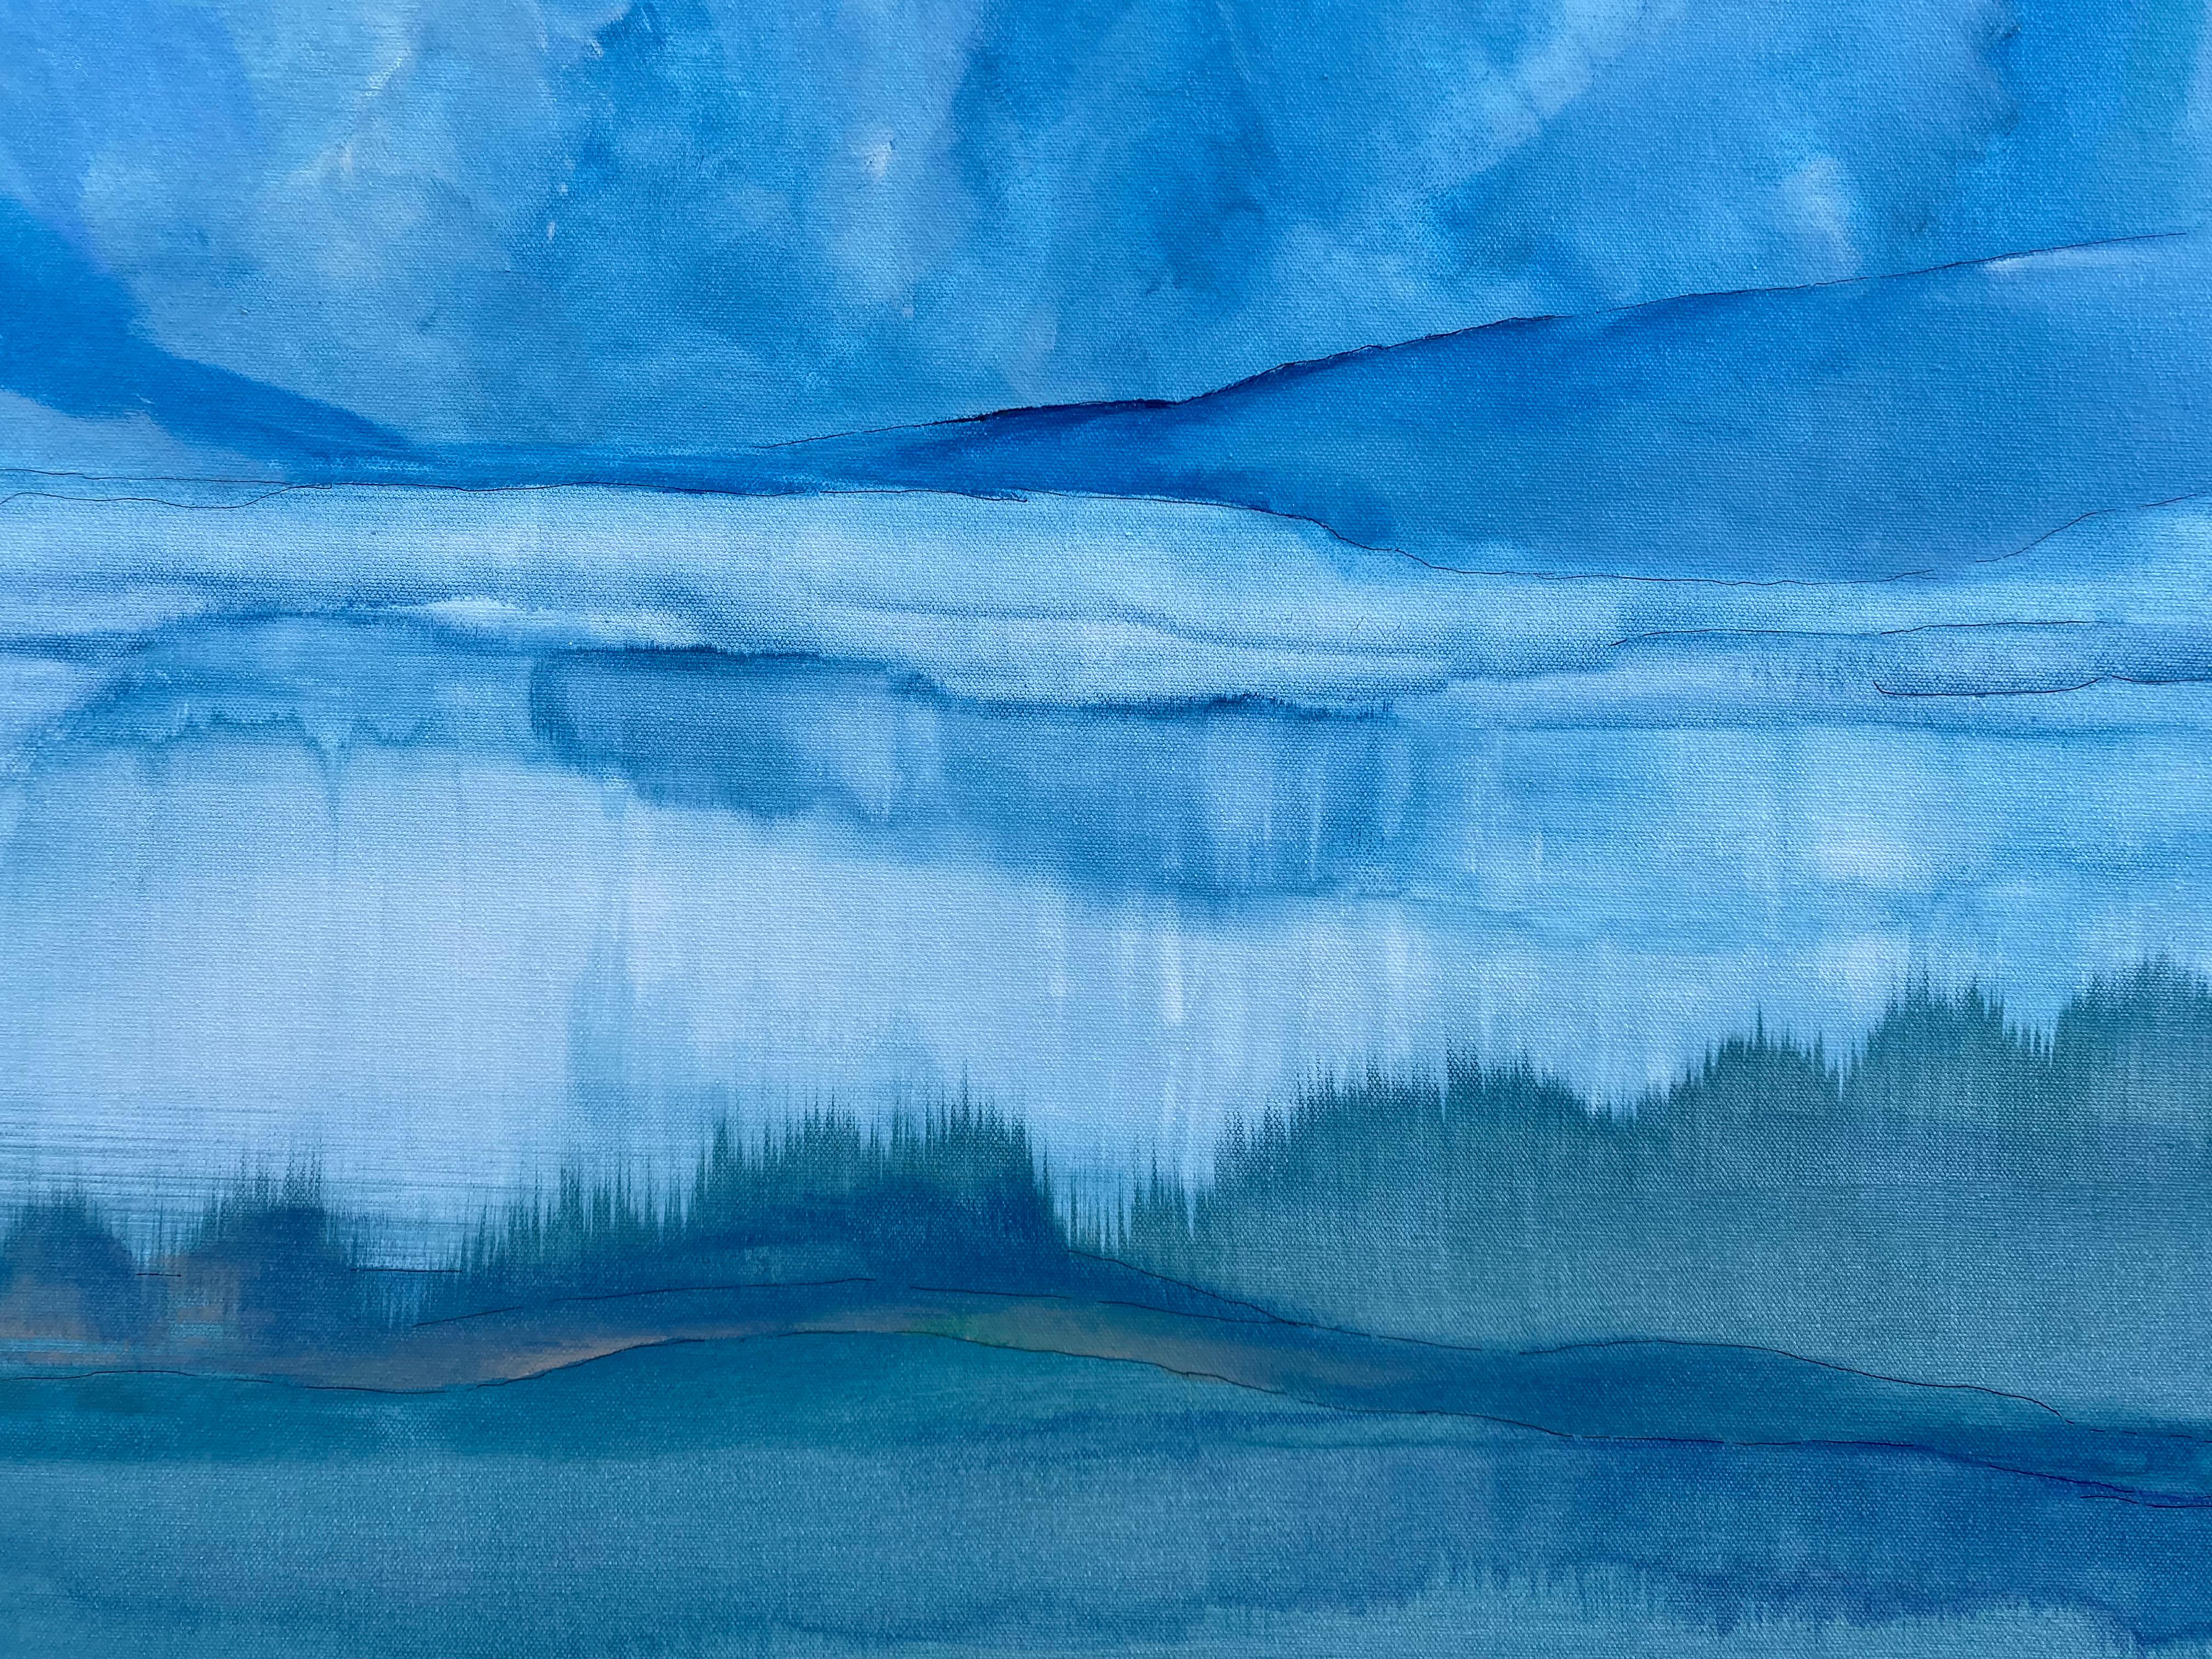 <p>Artist Comments<br>Artist Alicia Dunn depicts a striking abstract landscape inspired by icy western mountain mornings. Electrifying blue hues diffuse into a mysterious suggestion of panoramic scenery. Subtle representational elements develop